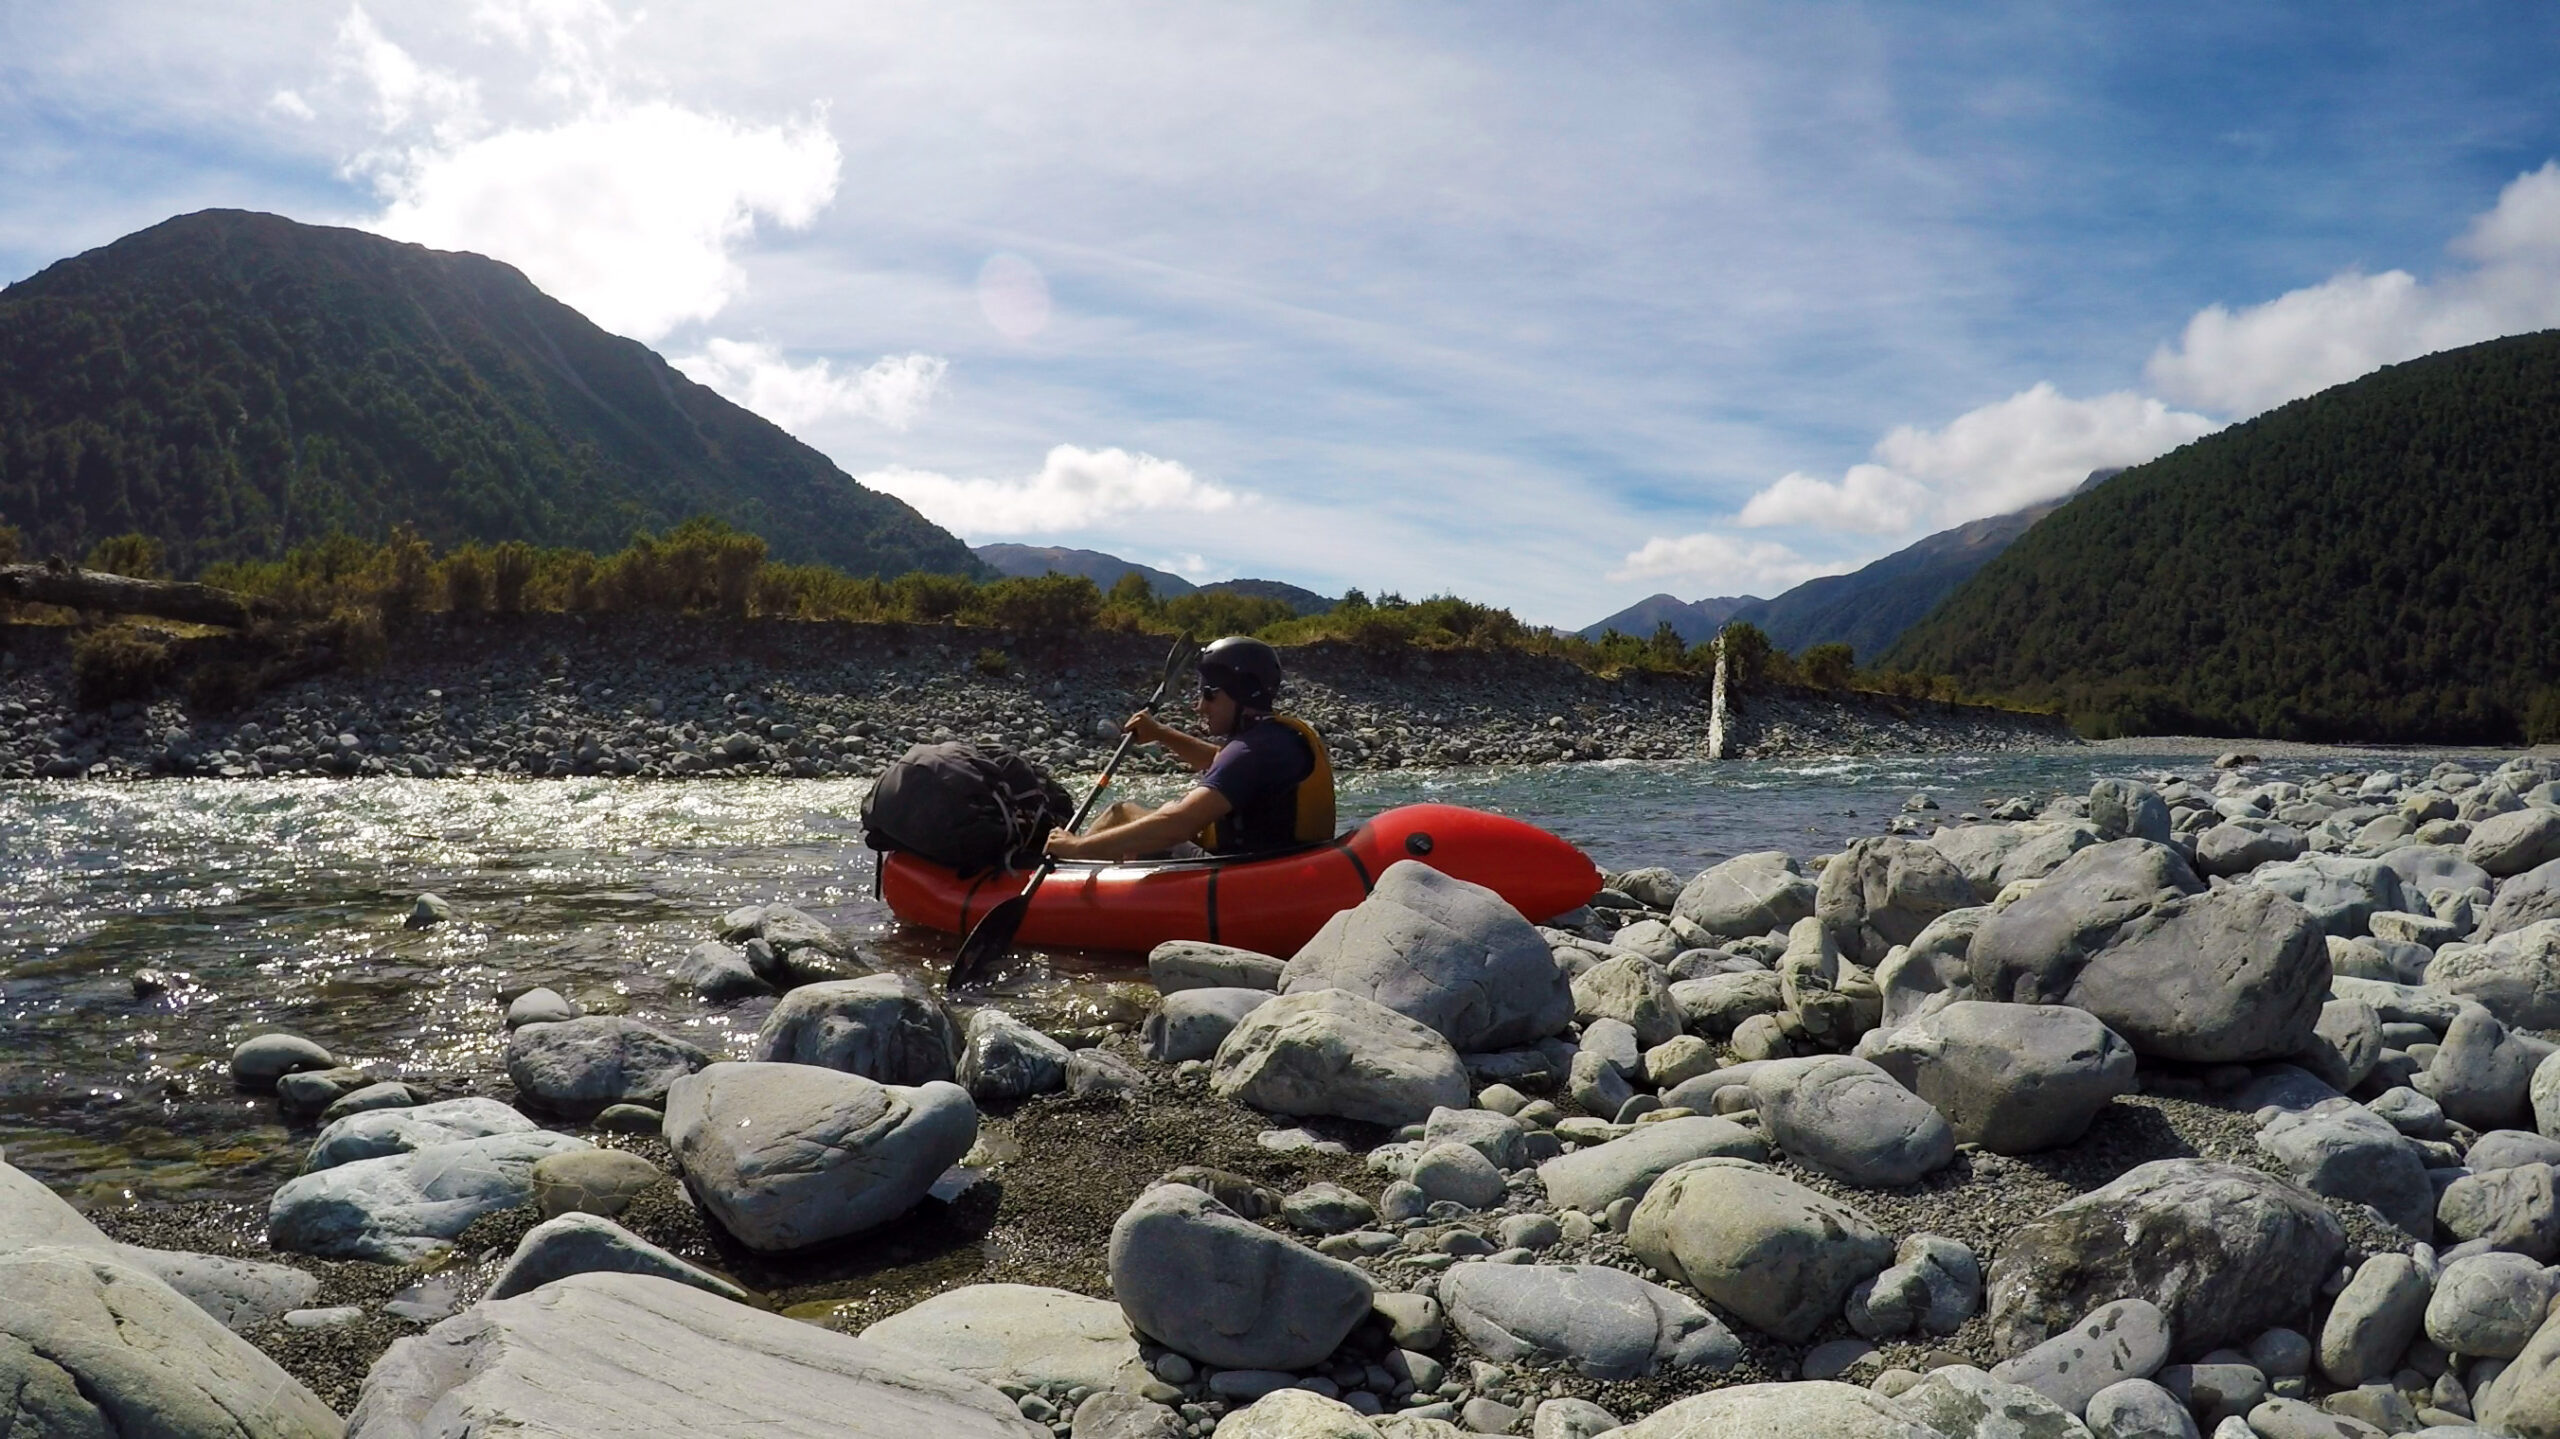 I aborted my attempt to packraft the Taramakau River after it became clear that the water level wasn't high enough.